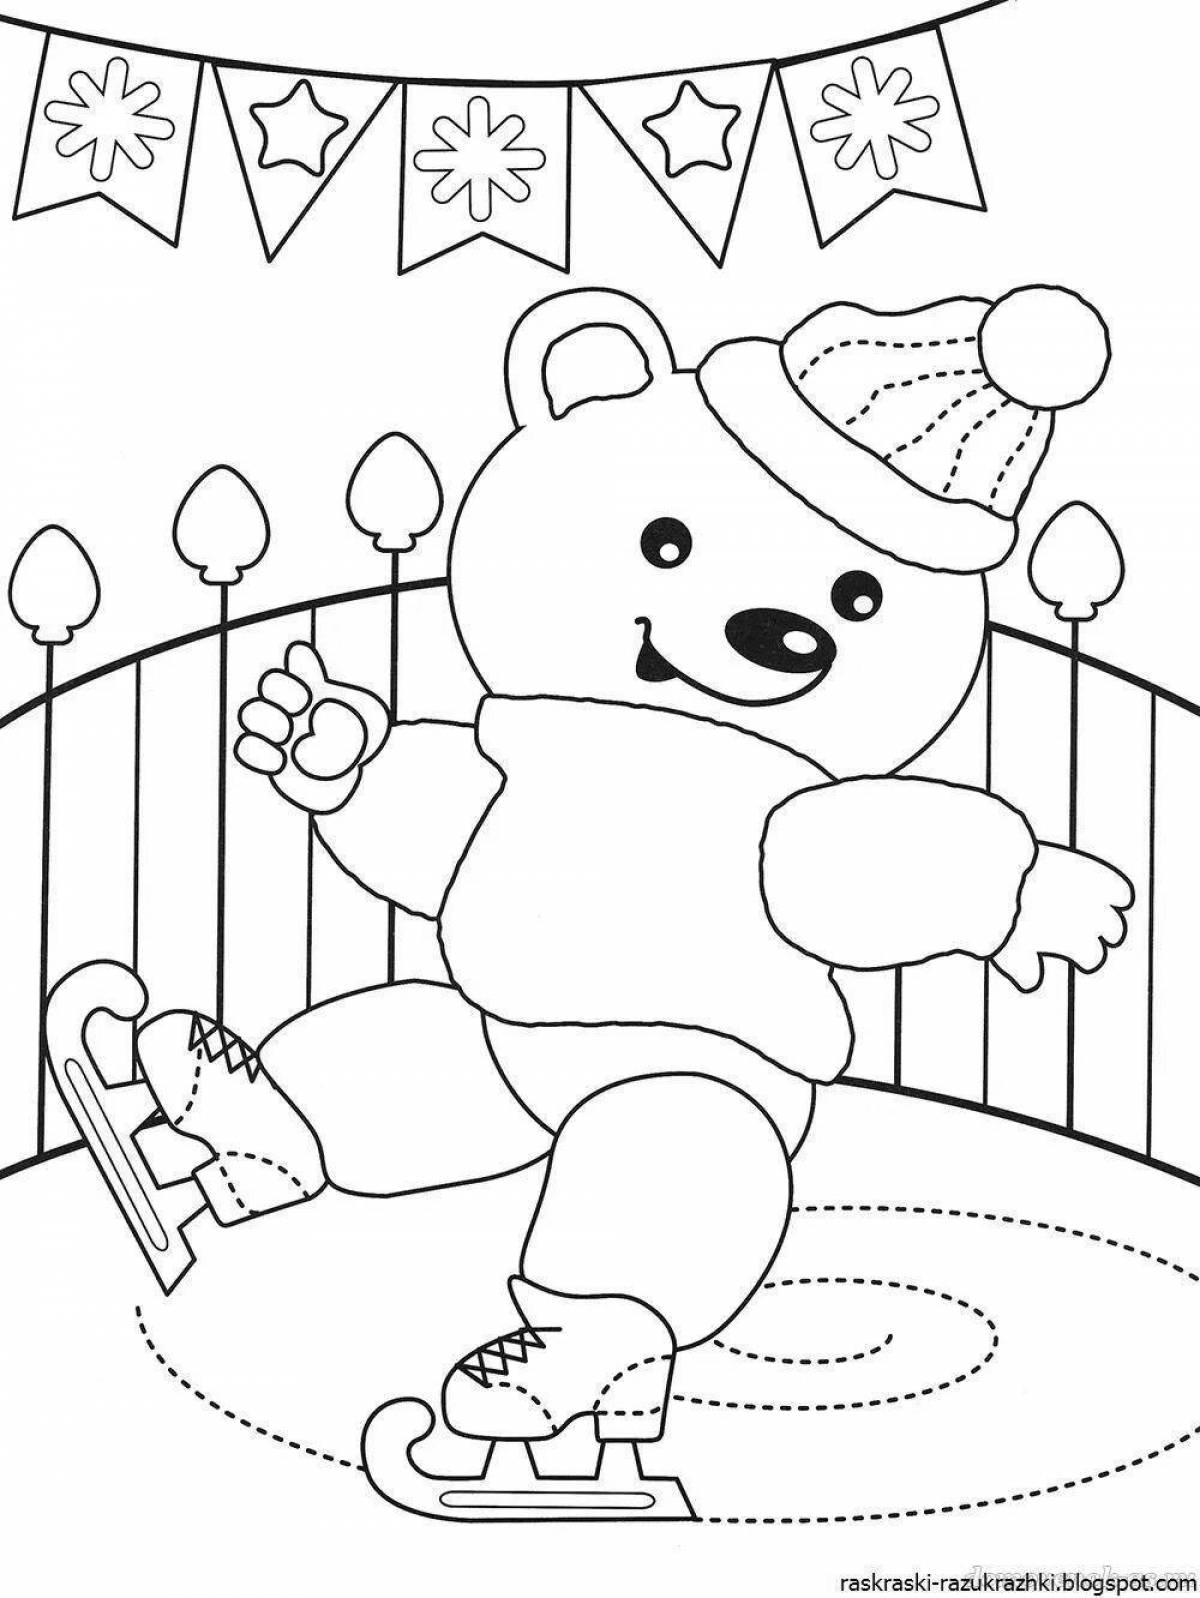 Dazzling winter coloring book for 2-3 year olds